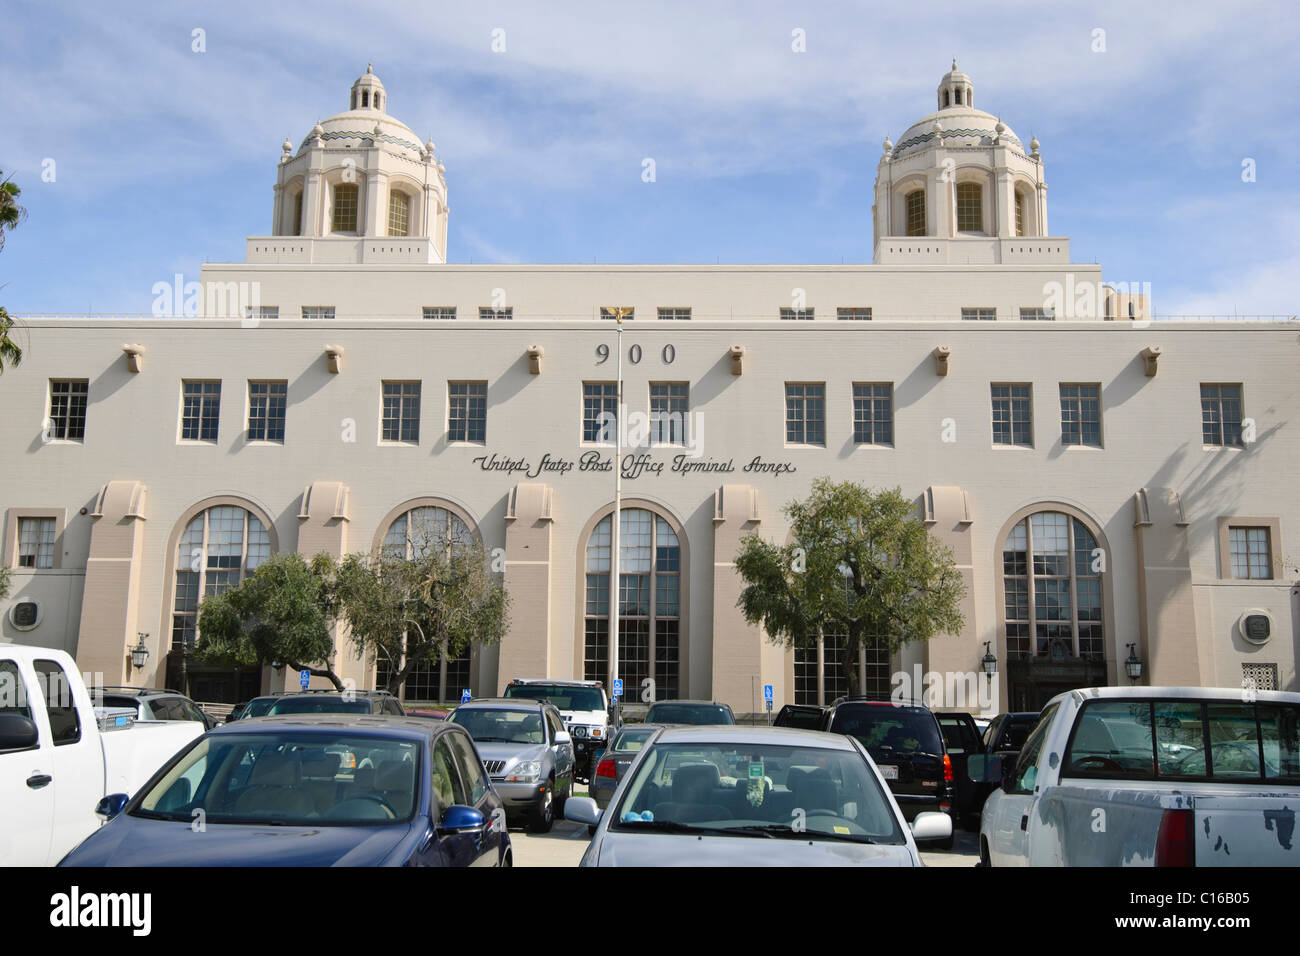 United States Post Office Terminal de Los Angeles l'annexe Photo Stock -  Alamy